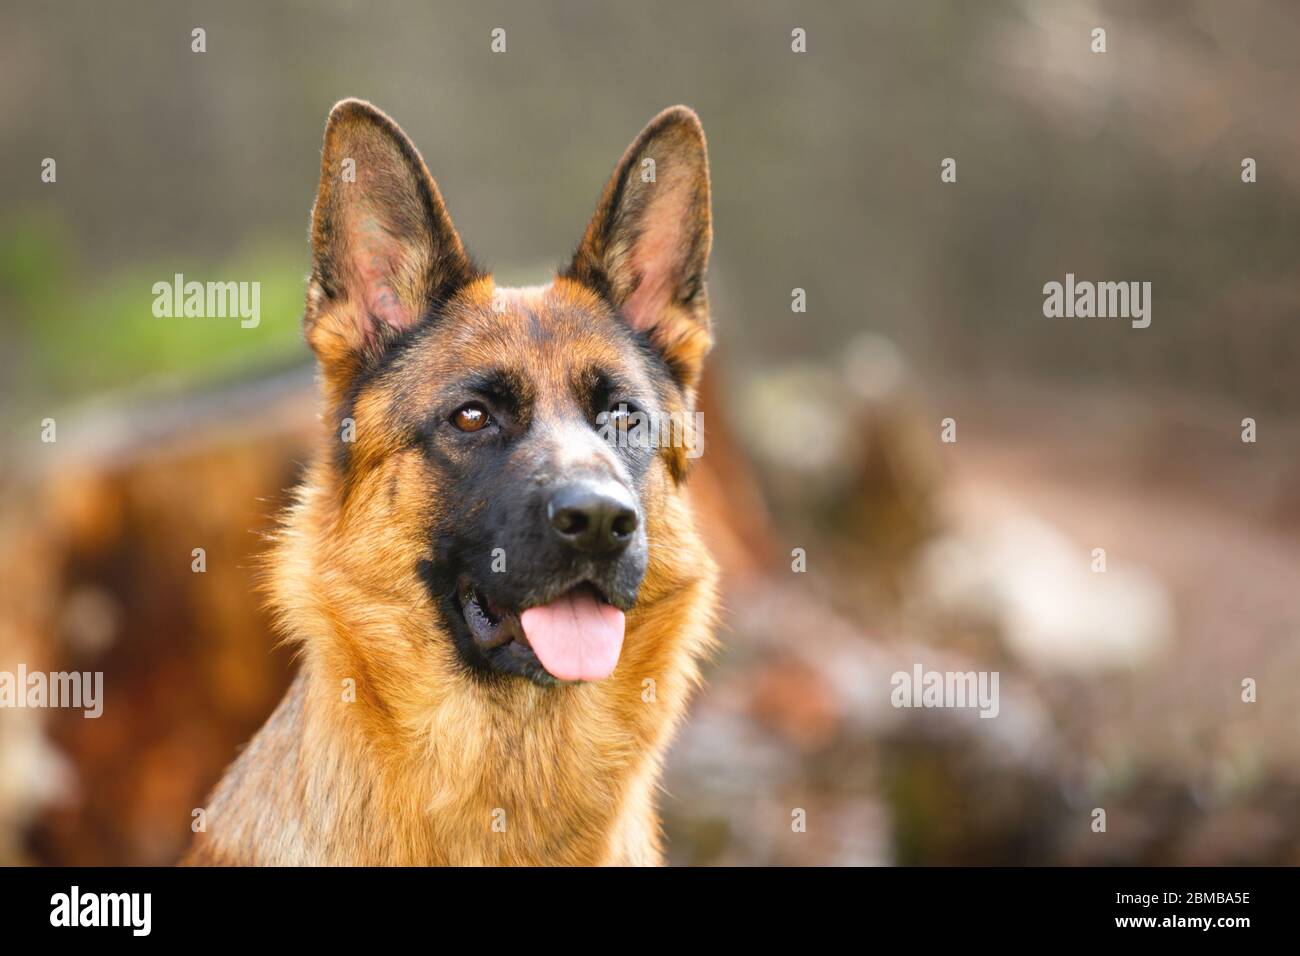 Portrait of a German shepherd in a park. Purebred dog. Stock Photo